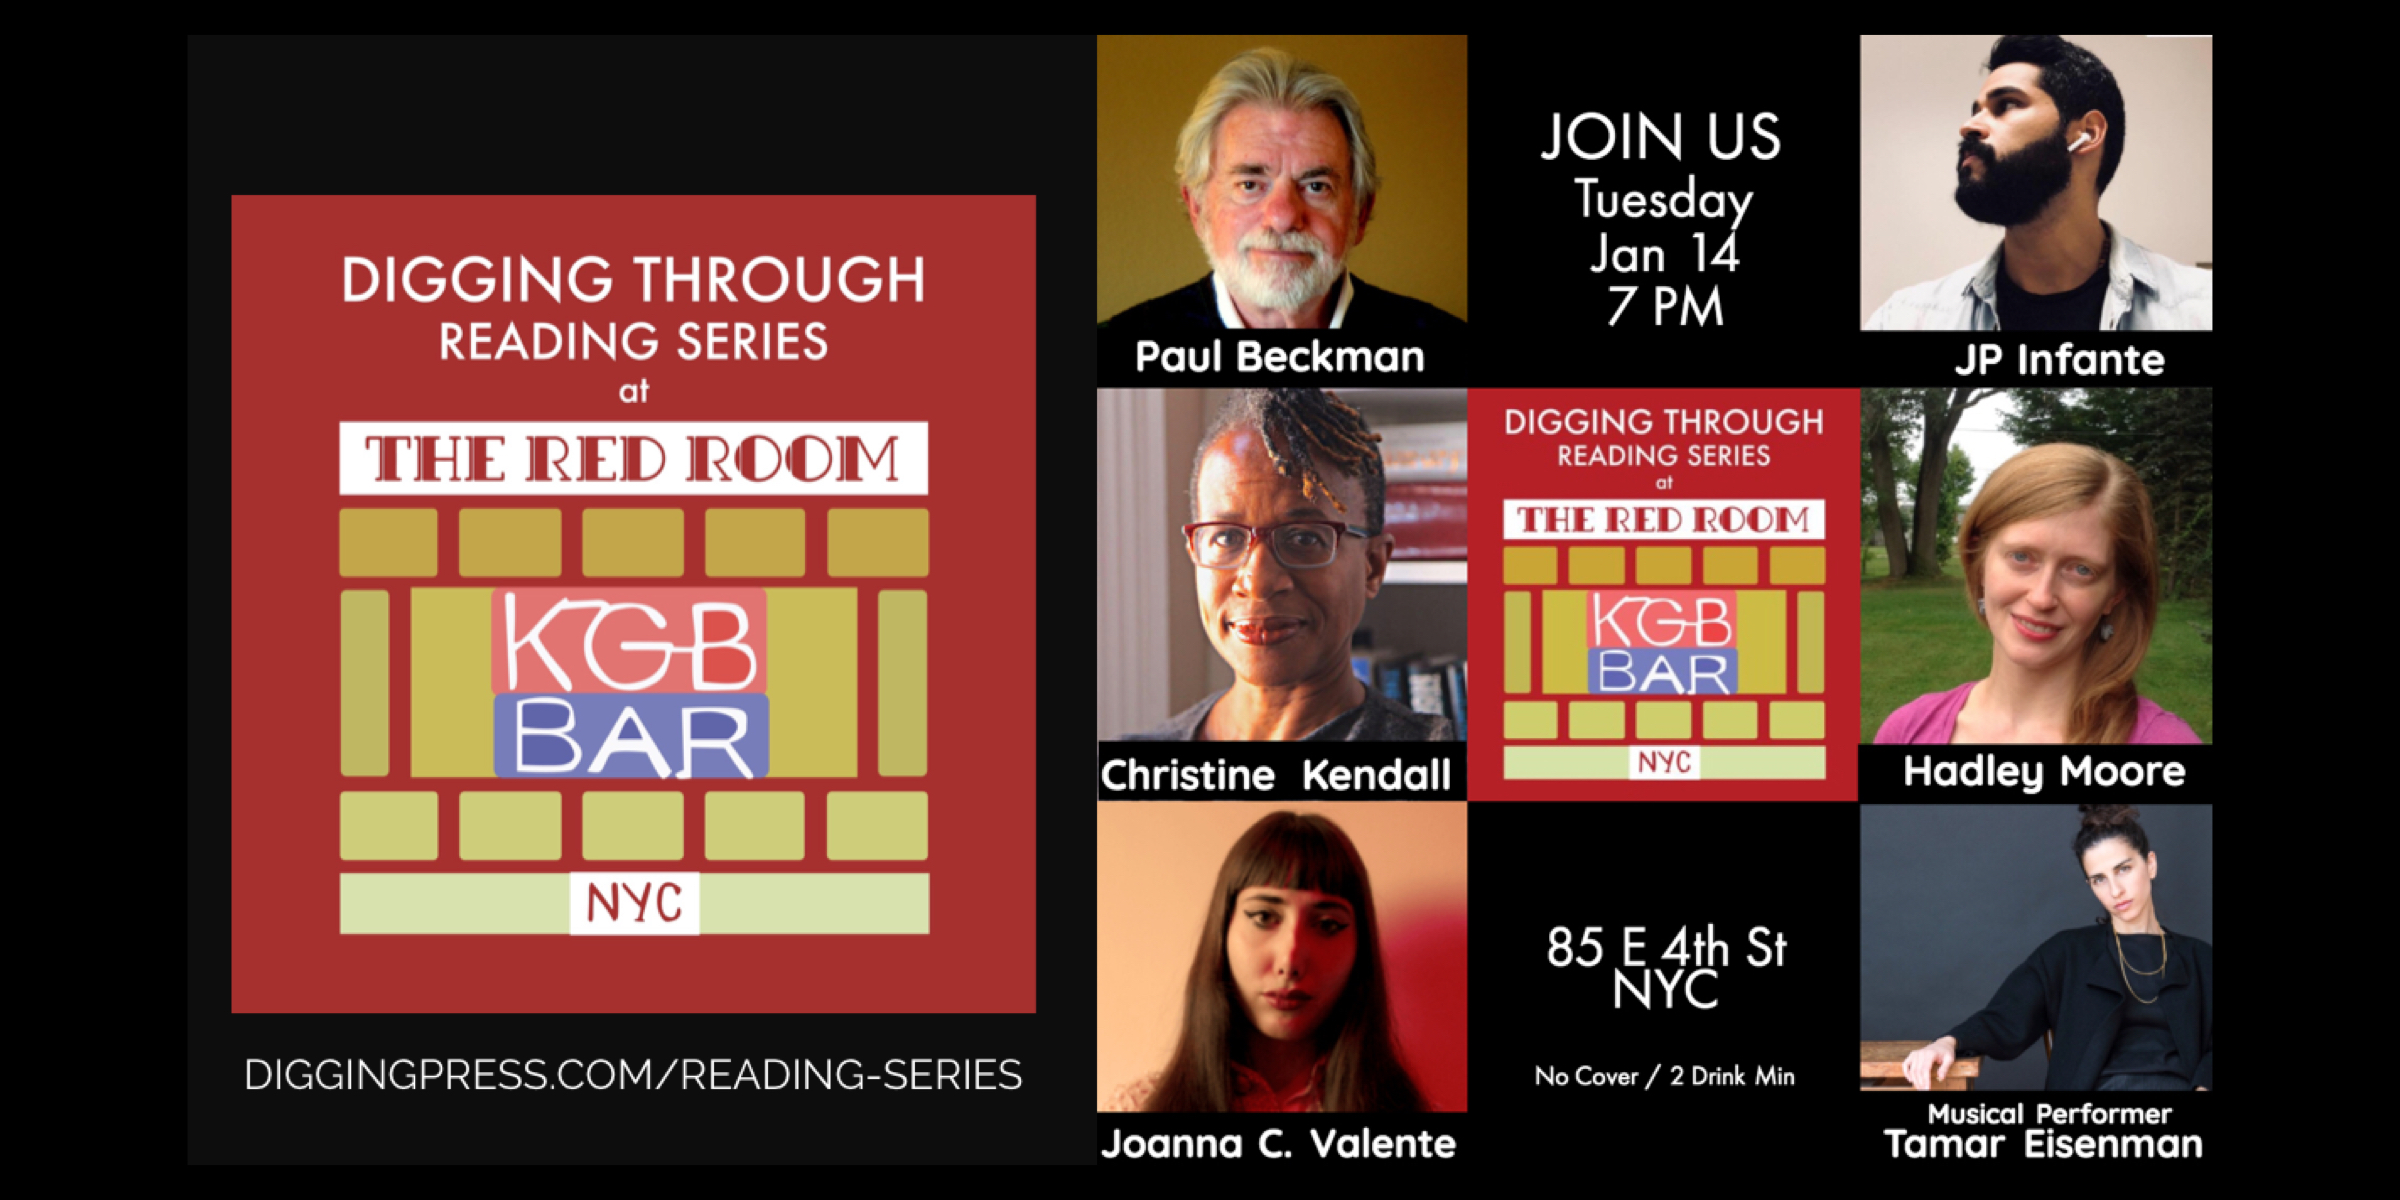 Announcing the Digging Through Reading Series